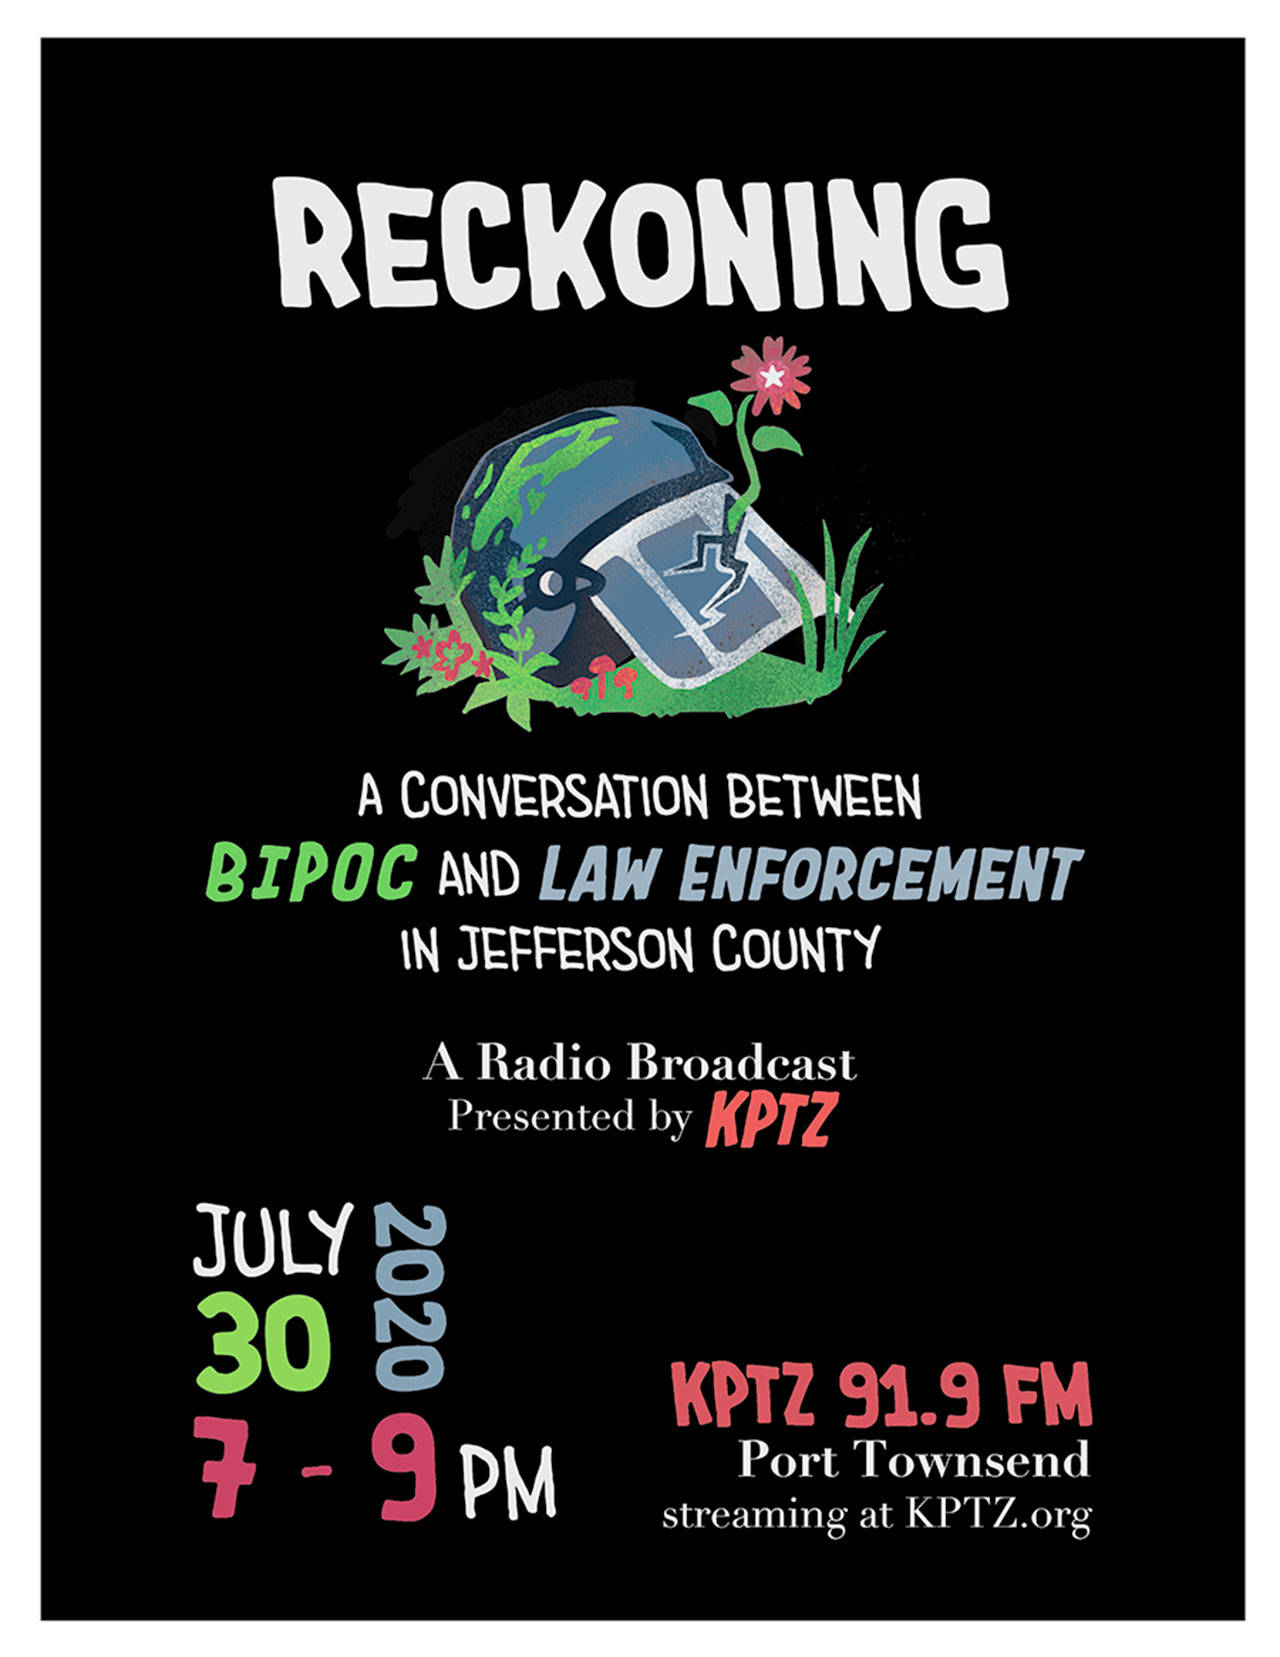 KPTZ hosted a two-hour panel discussion, via Zoom, called the Reckoning with members of the BIPOC community in Jefferson County and the Jefferson County Sheriff Joe Nole, discussing race and the justice system in the county.